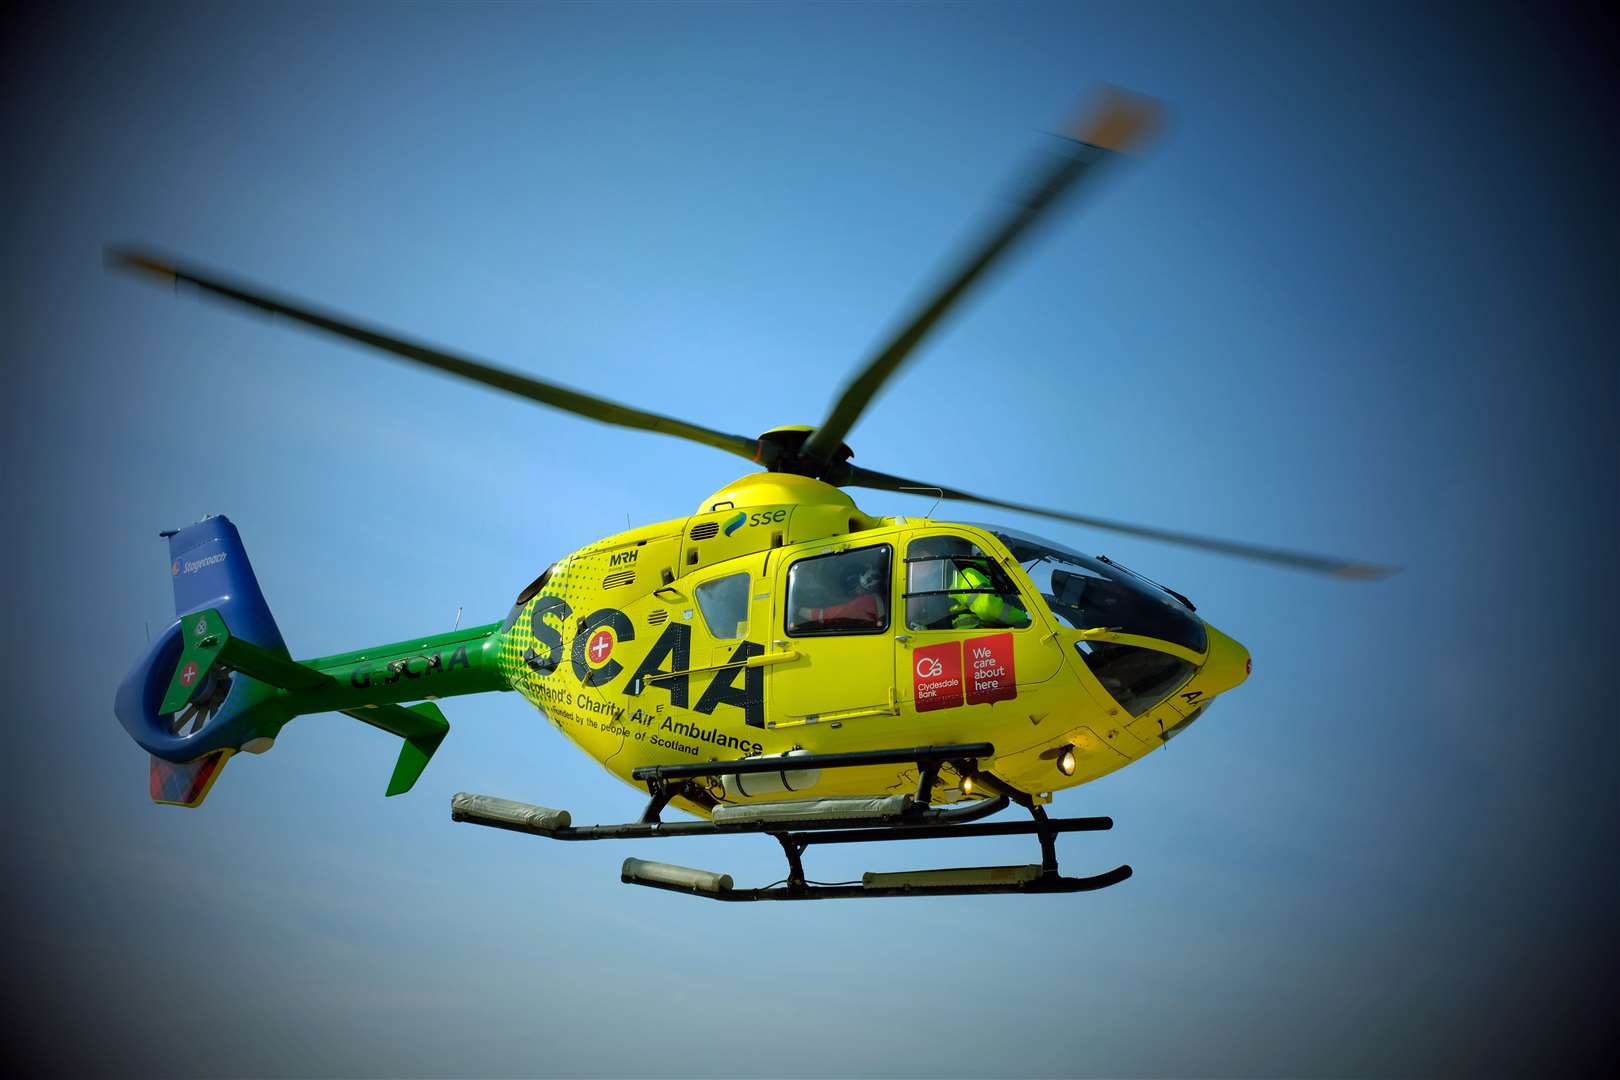 Scotland’s Charity Air Ambulance (SCAA) helicopter Helimed 76